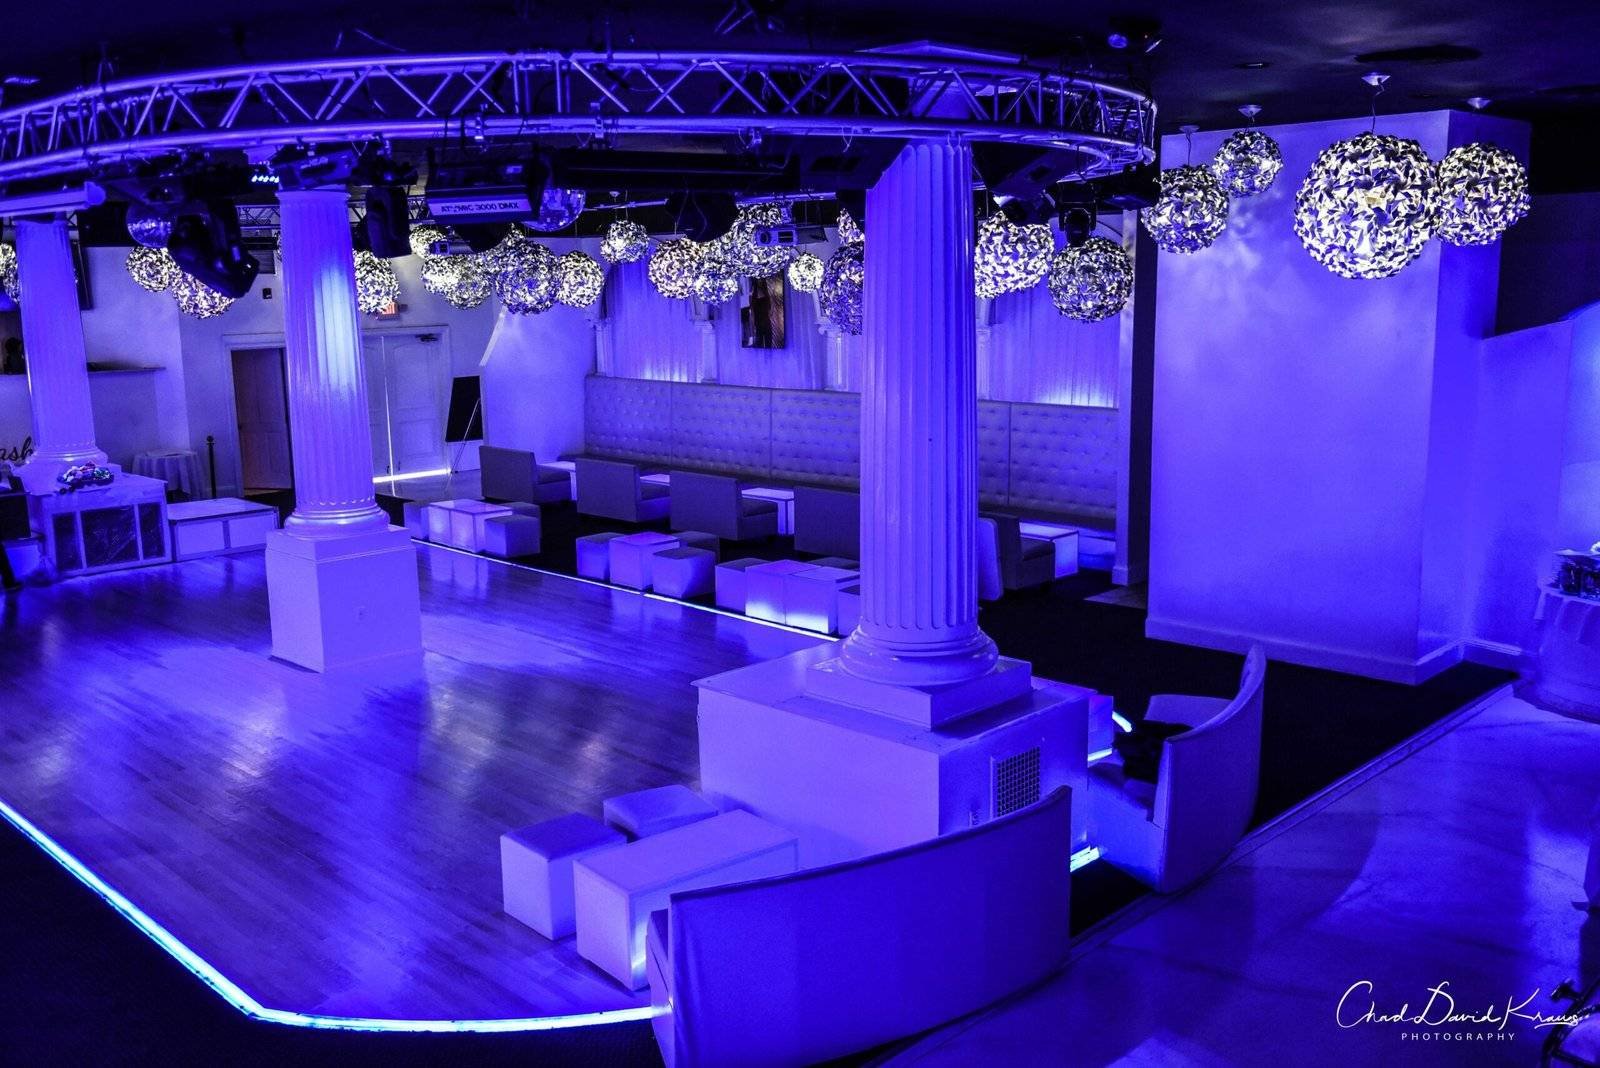 The Epicentre of Entertainment: Why Coliseum’s Night Club is the Best in Westchester County